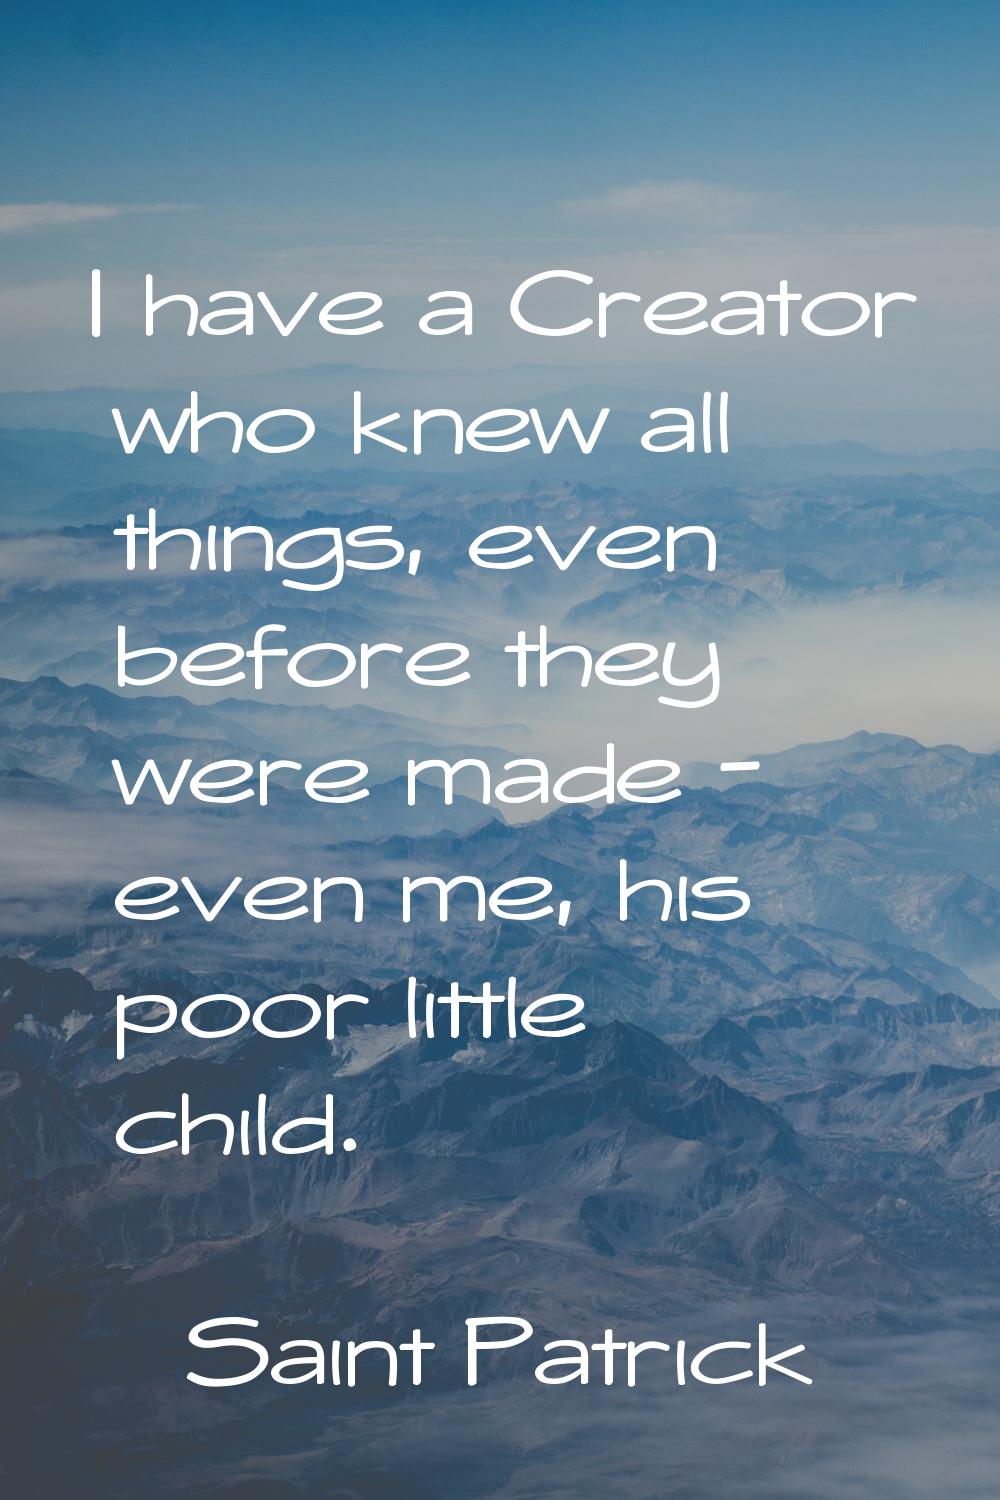 I have a Creator who knew all things, even before they were made - even me, his poor little child.